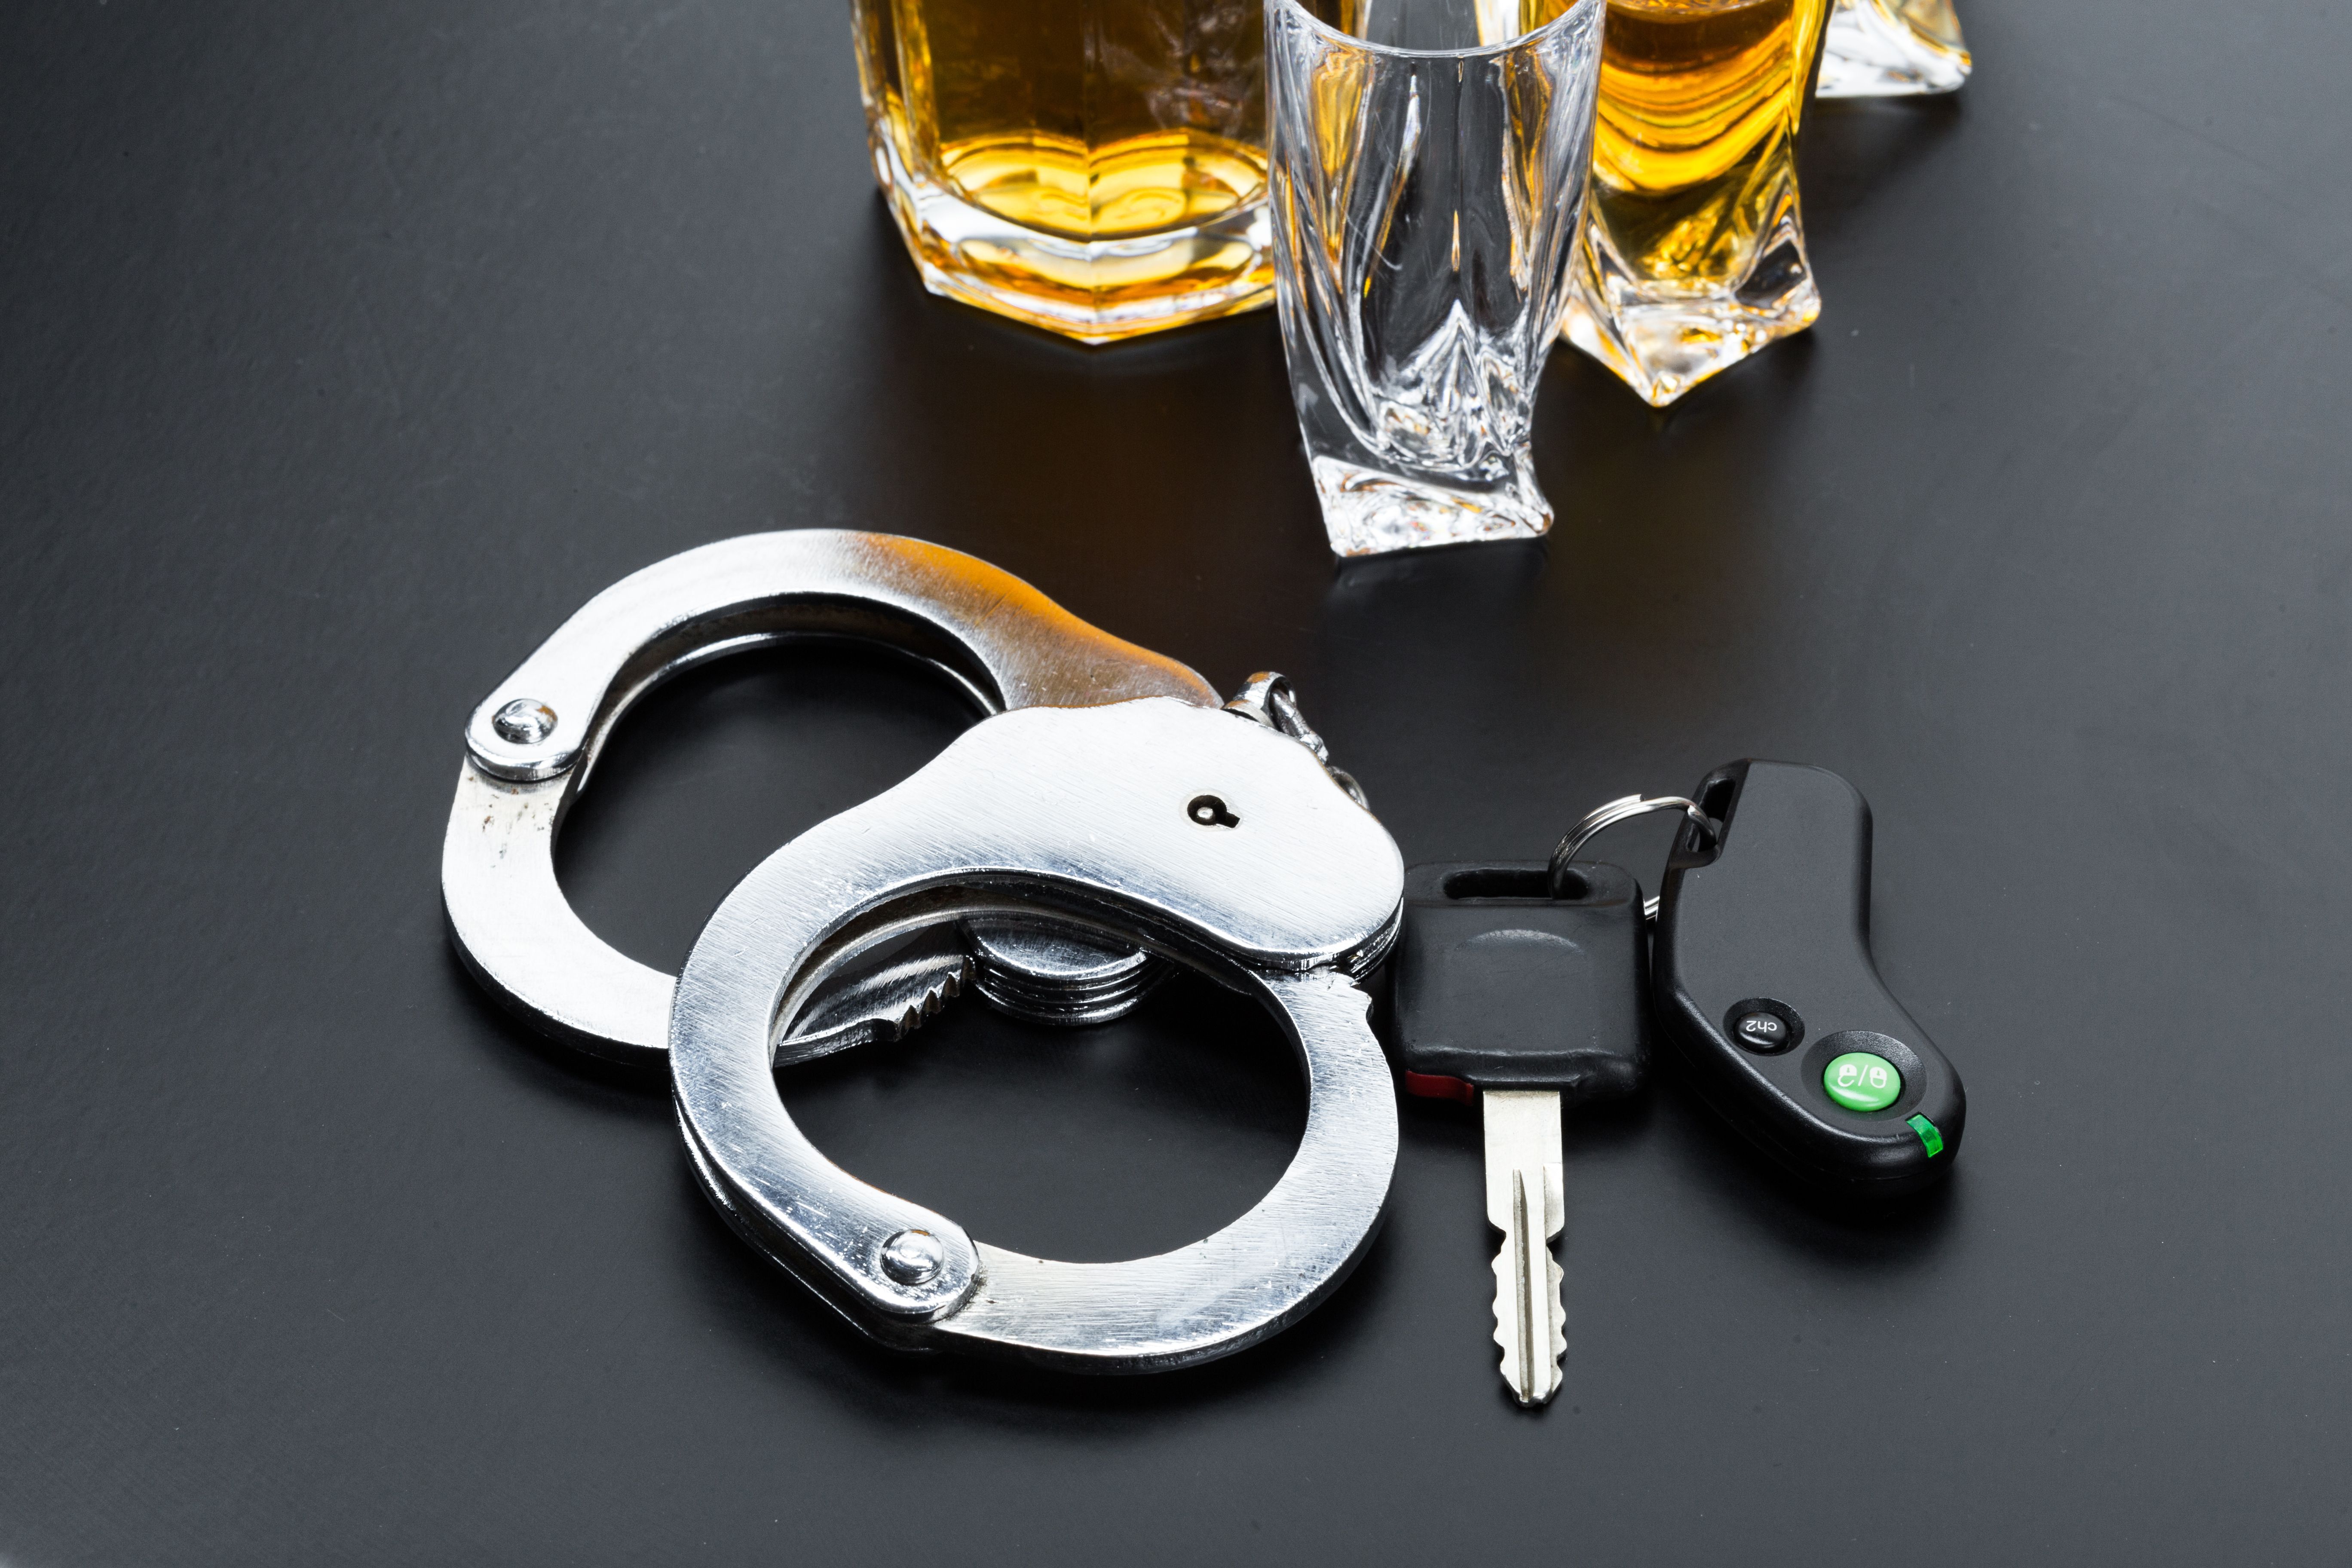 Handcuffs, car keys and alcohol on a table